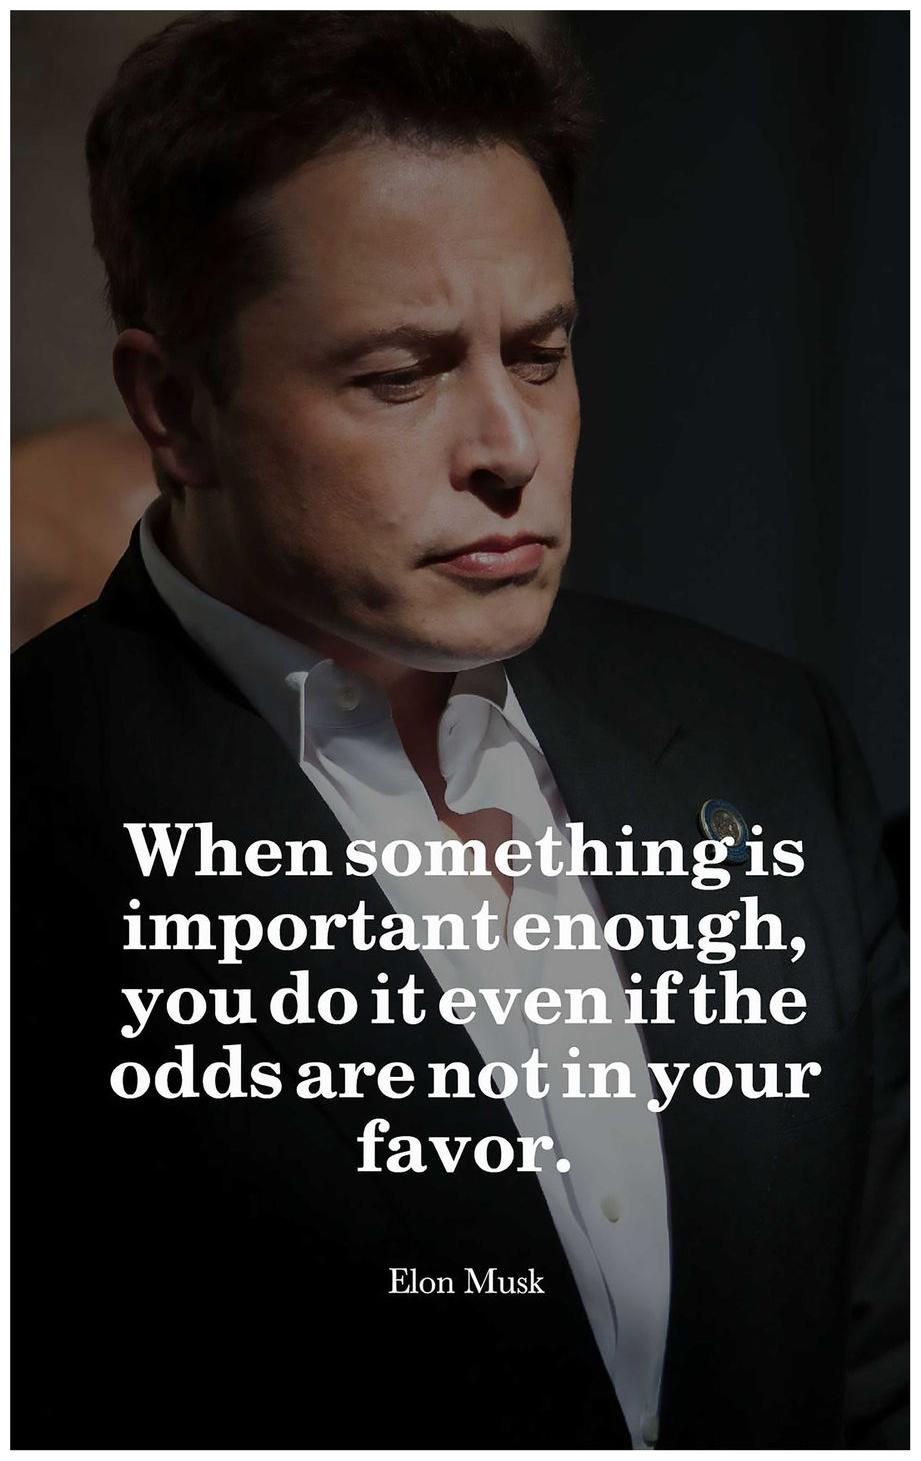 Buy Elon Musk Posters. elon musk posters. elon musk inspirational posters. elon musk quotes posters Online at Low Prices in India